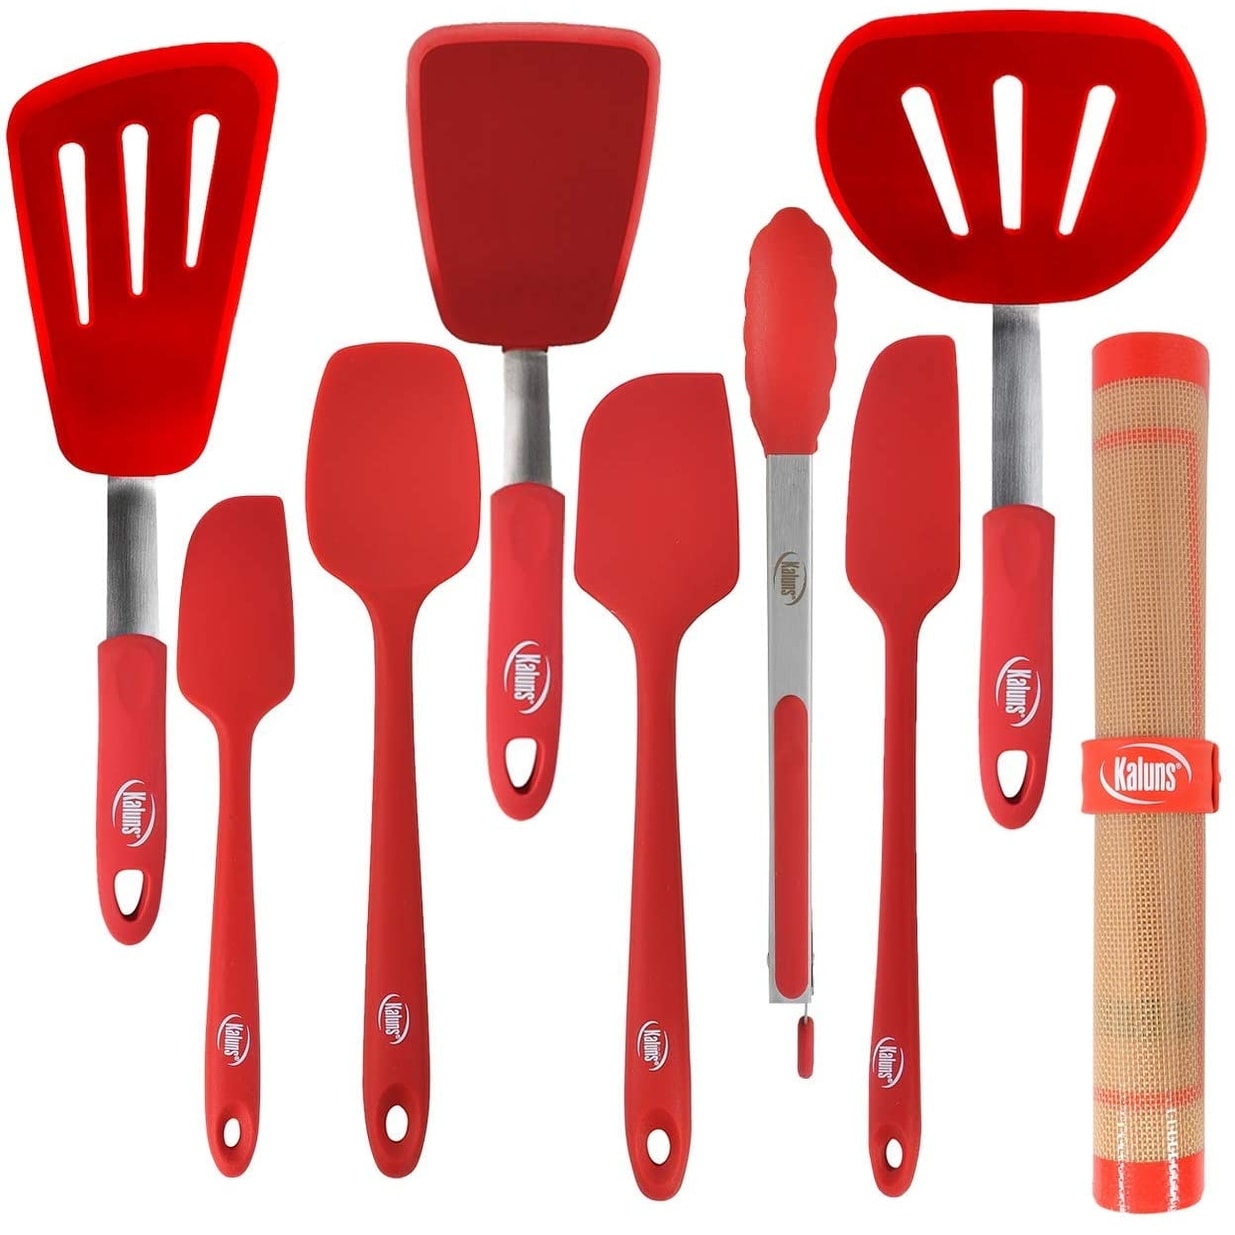 Silicone Cooking Utensils Kitchen Utensil Set-12 Pieces Colorful